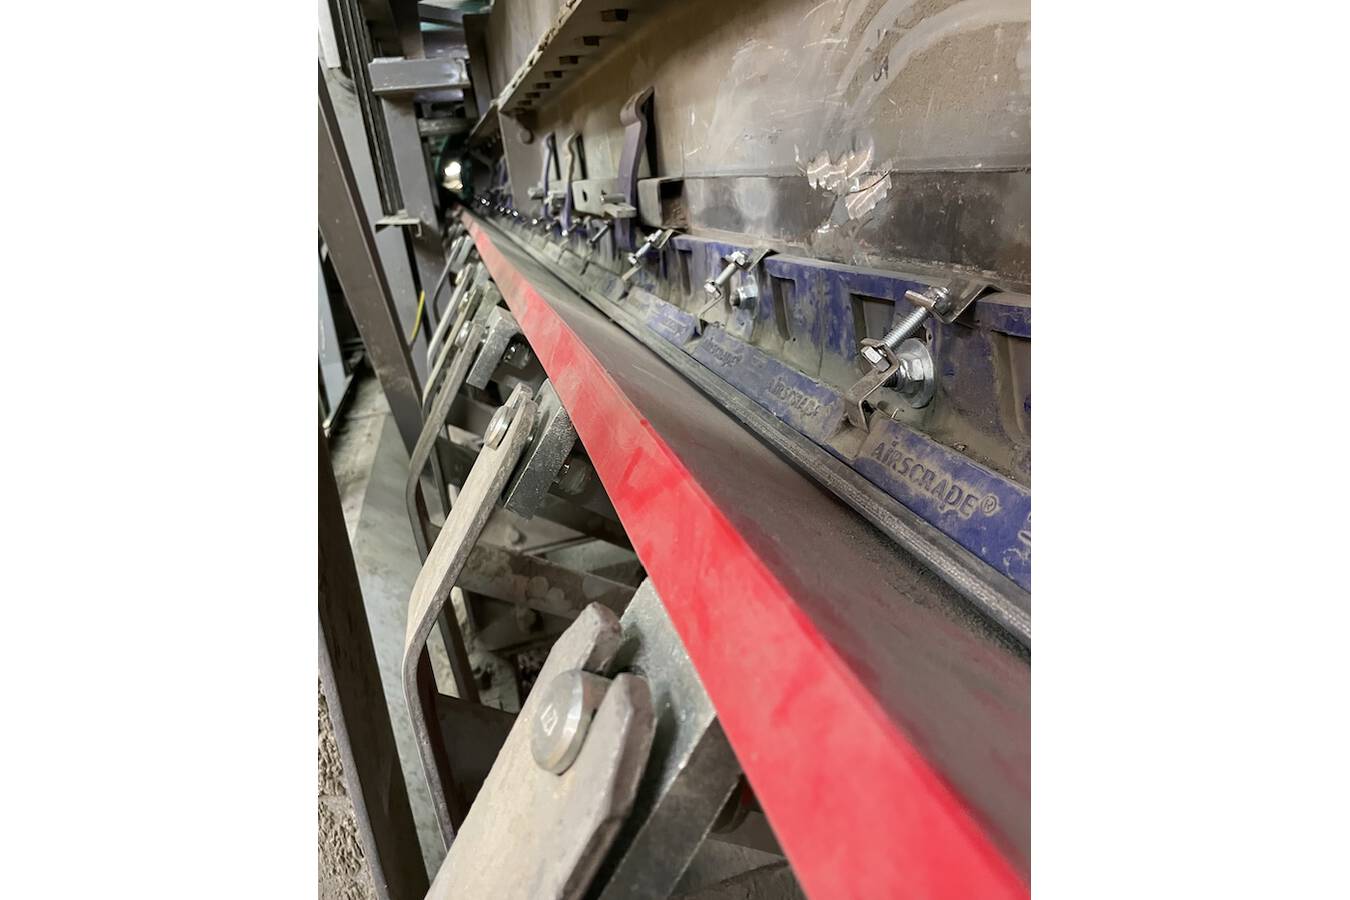 AirScrape in a clinker Vessel discharger Dust-, spillage- and maintenance-free conveyor belt skirting. Contact-free and thus frictionless by using a Venturi effect to prevent spillage.